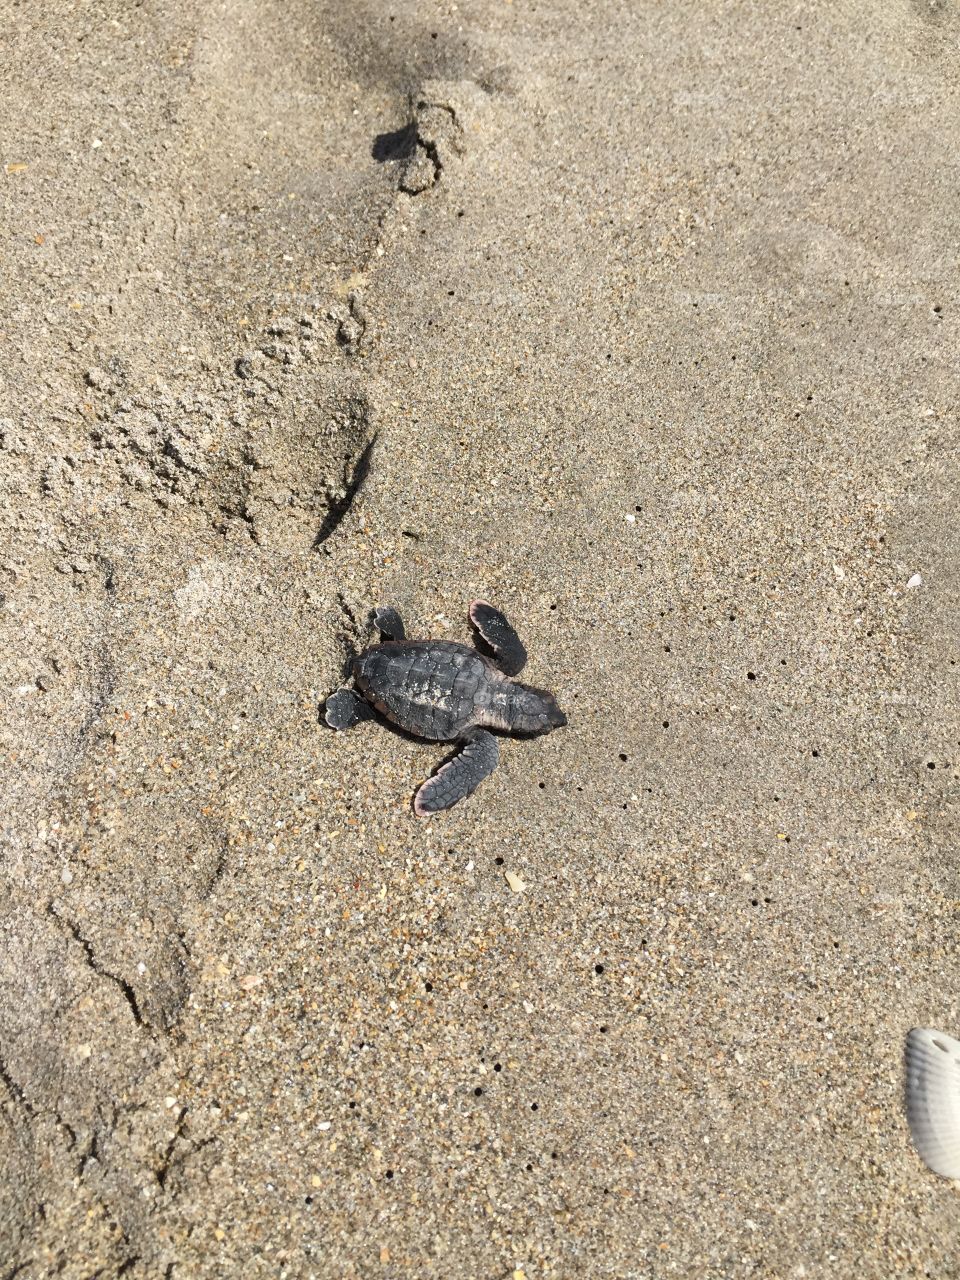 A turtle hatchling makes his way to sea.